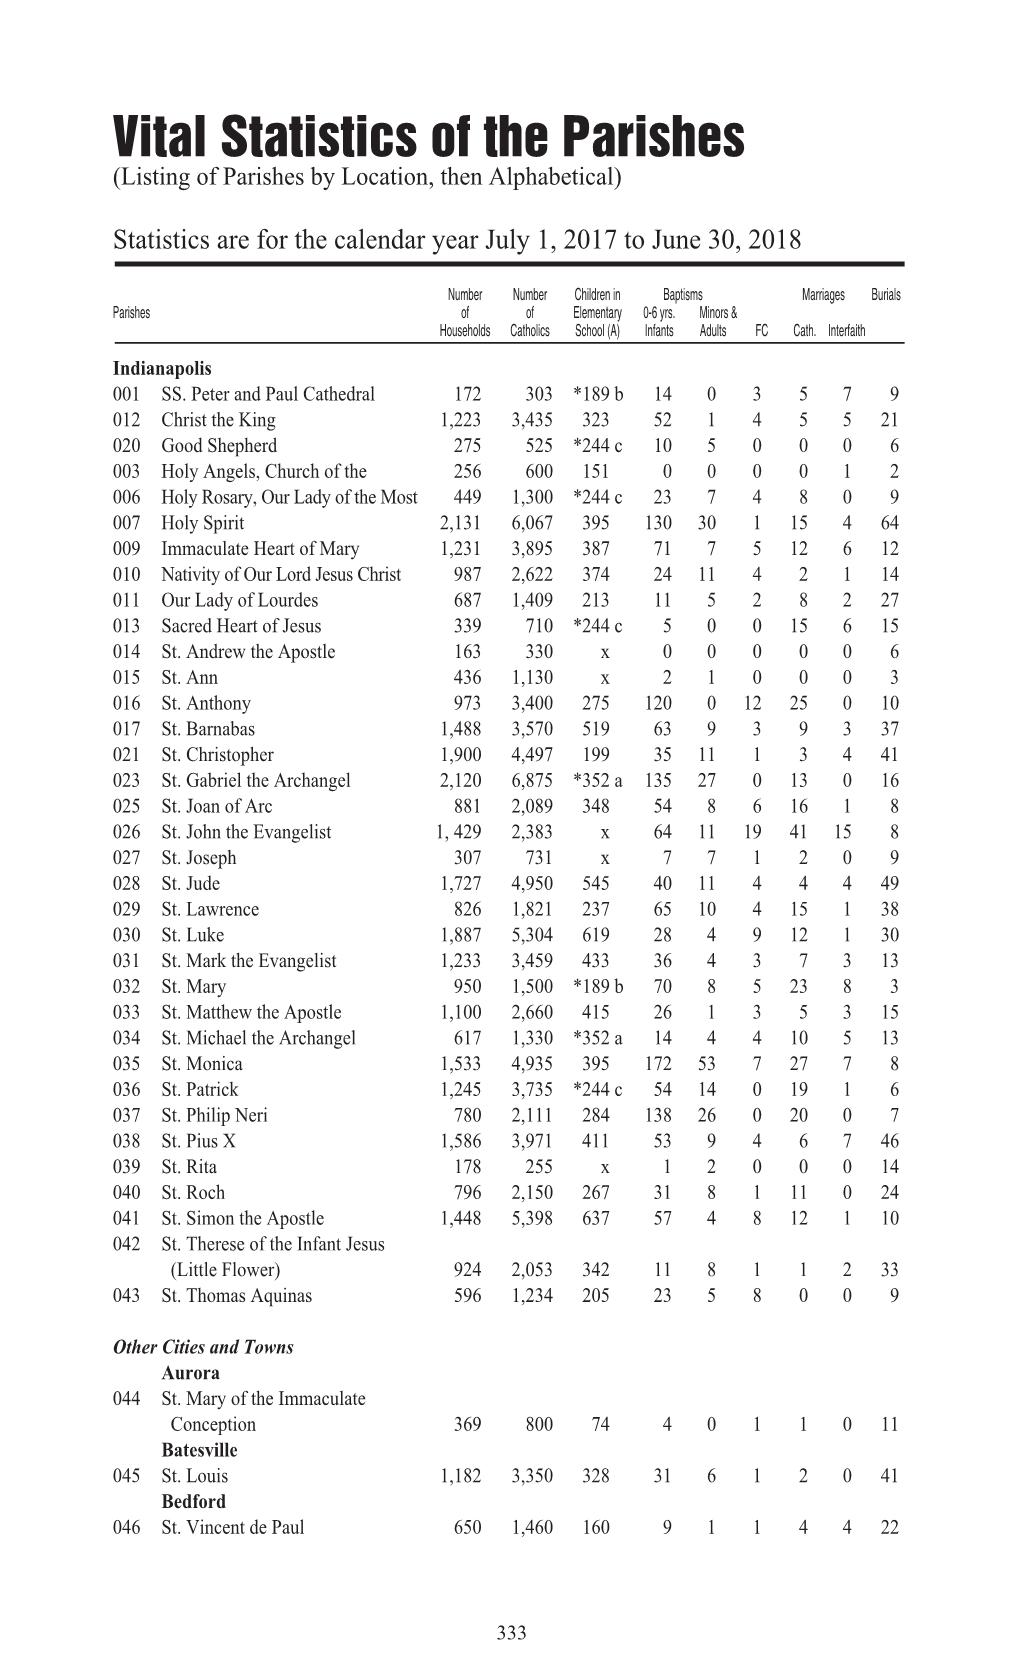 Vital Statistics of the Parishes (Listing of Parishes by Location, Then Alphabetical)